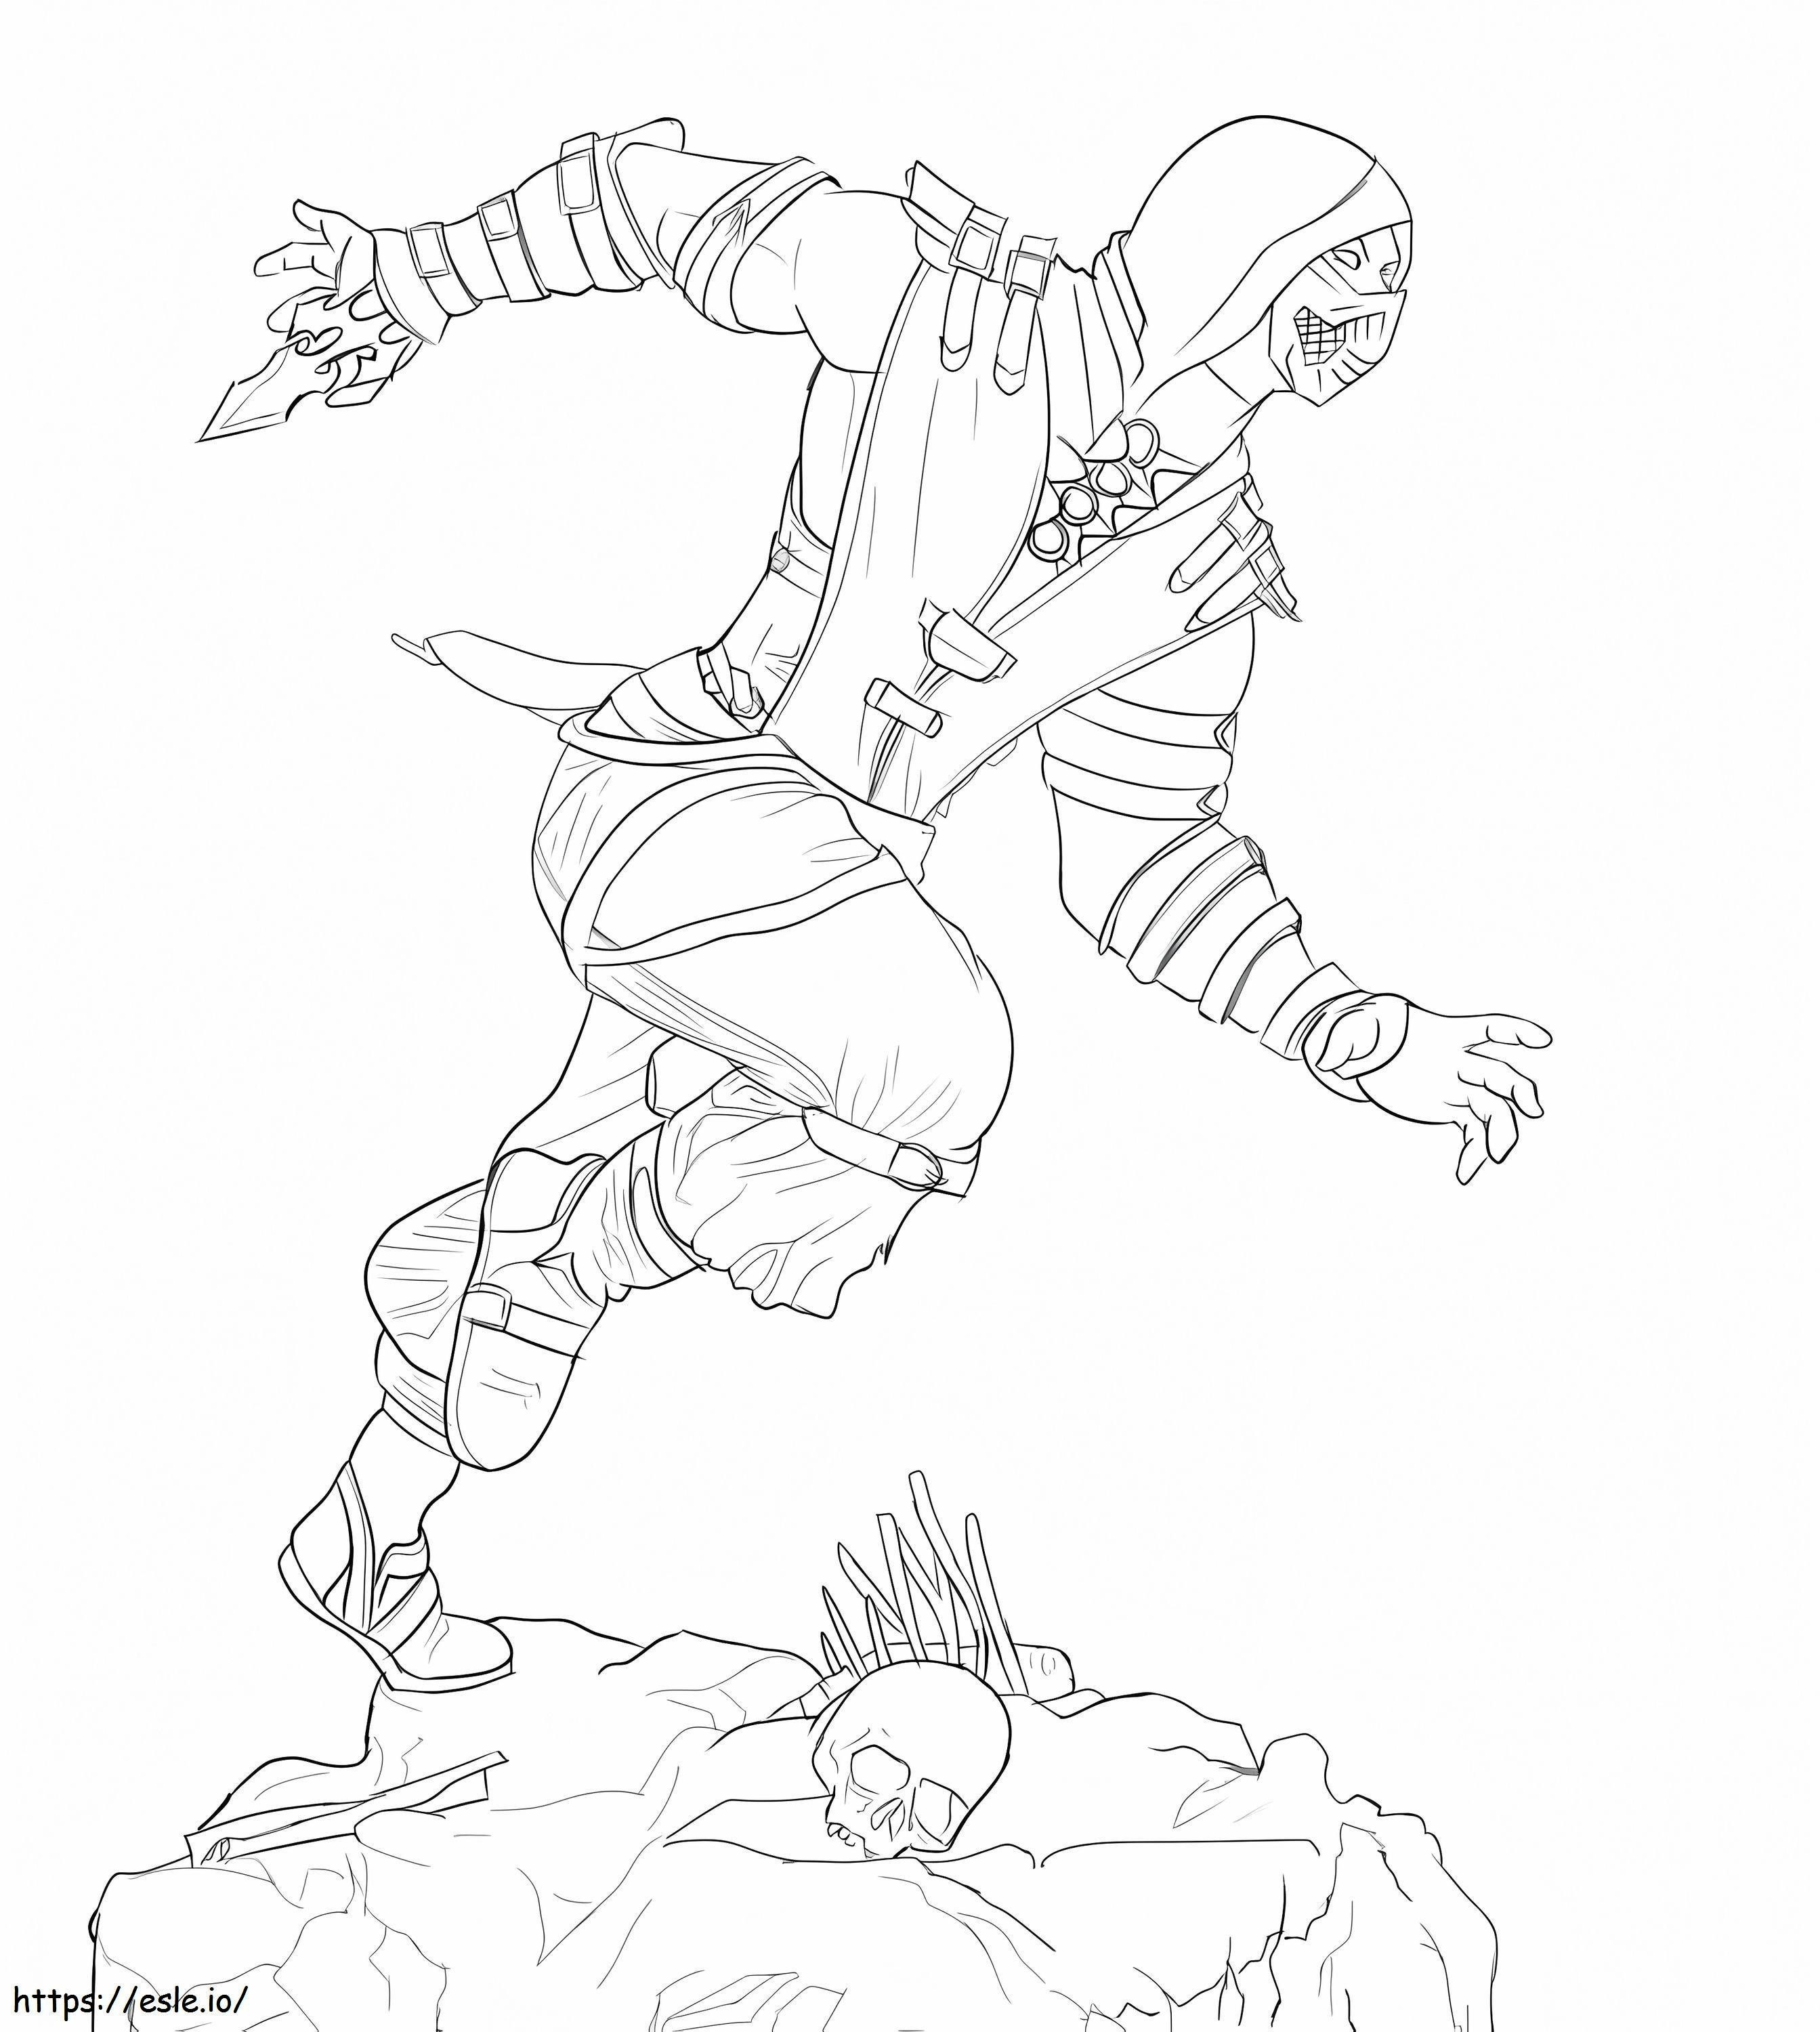 Scorpion Action coloring page